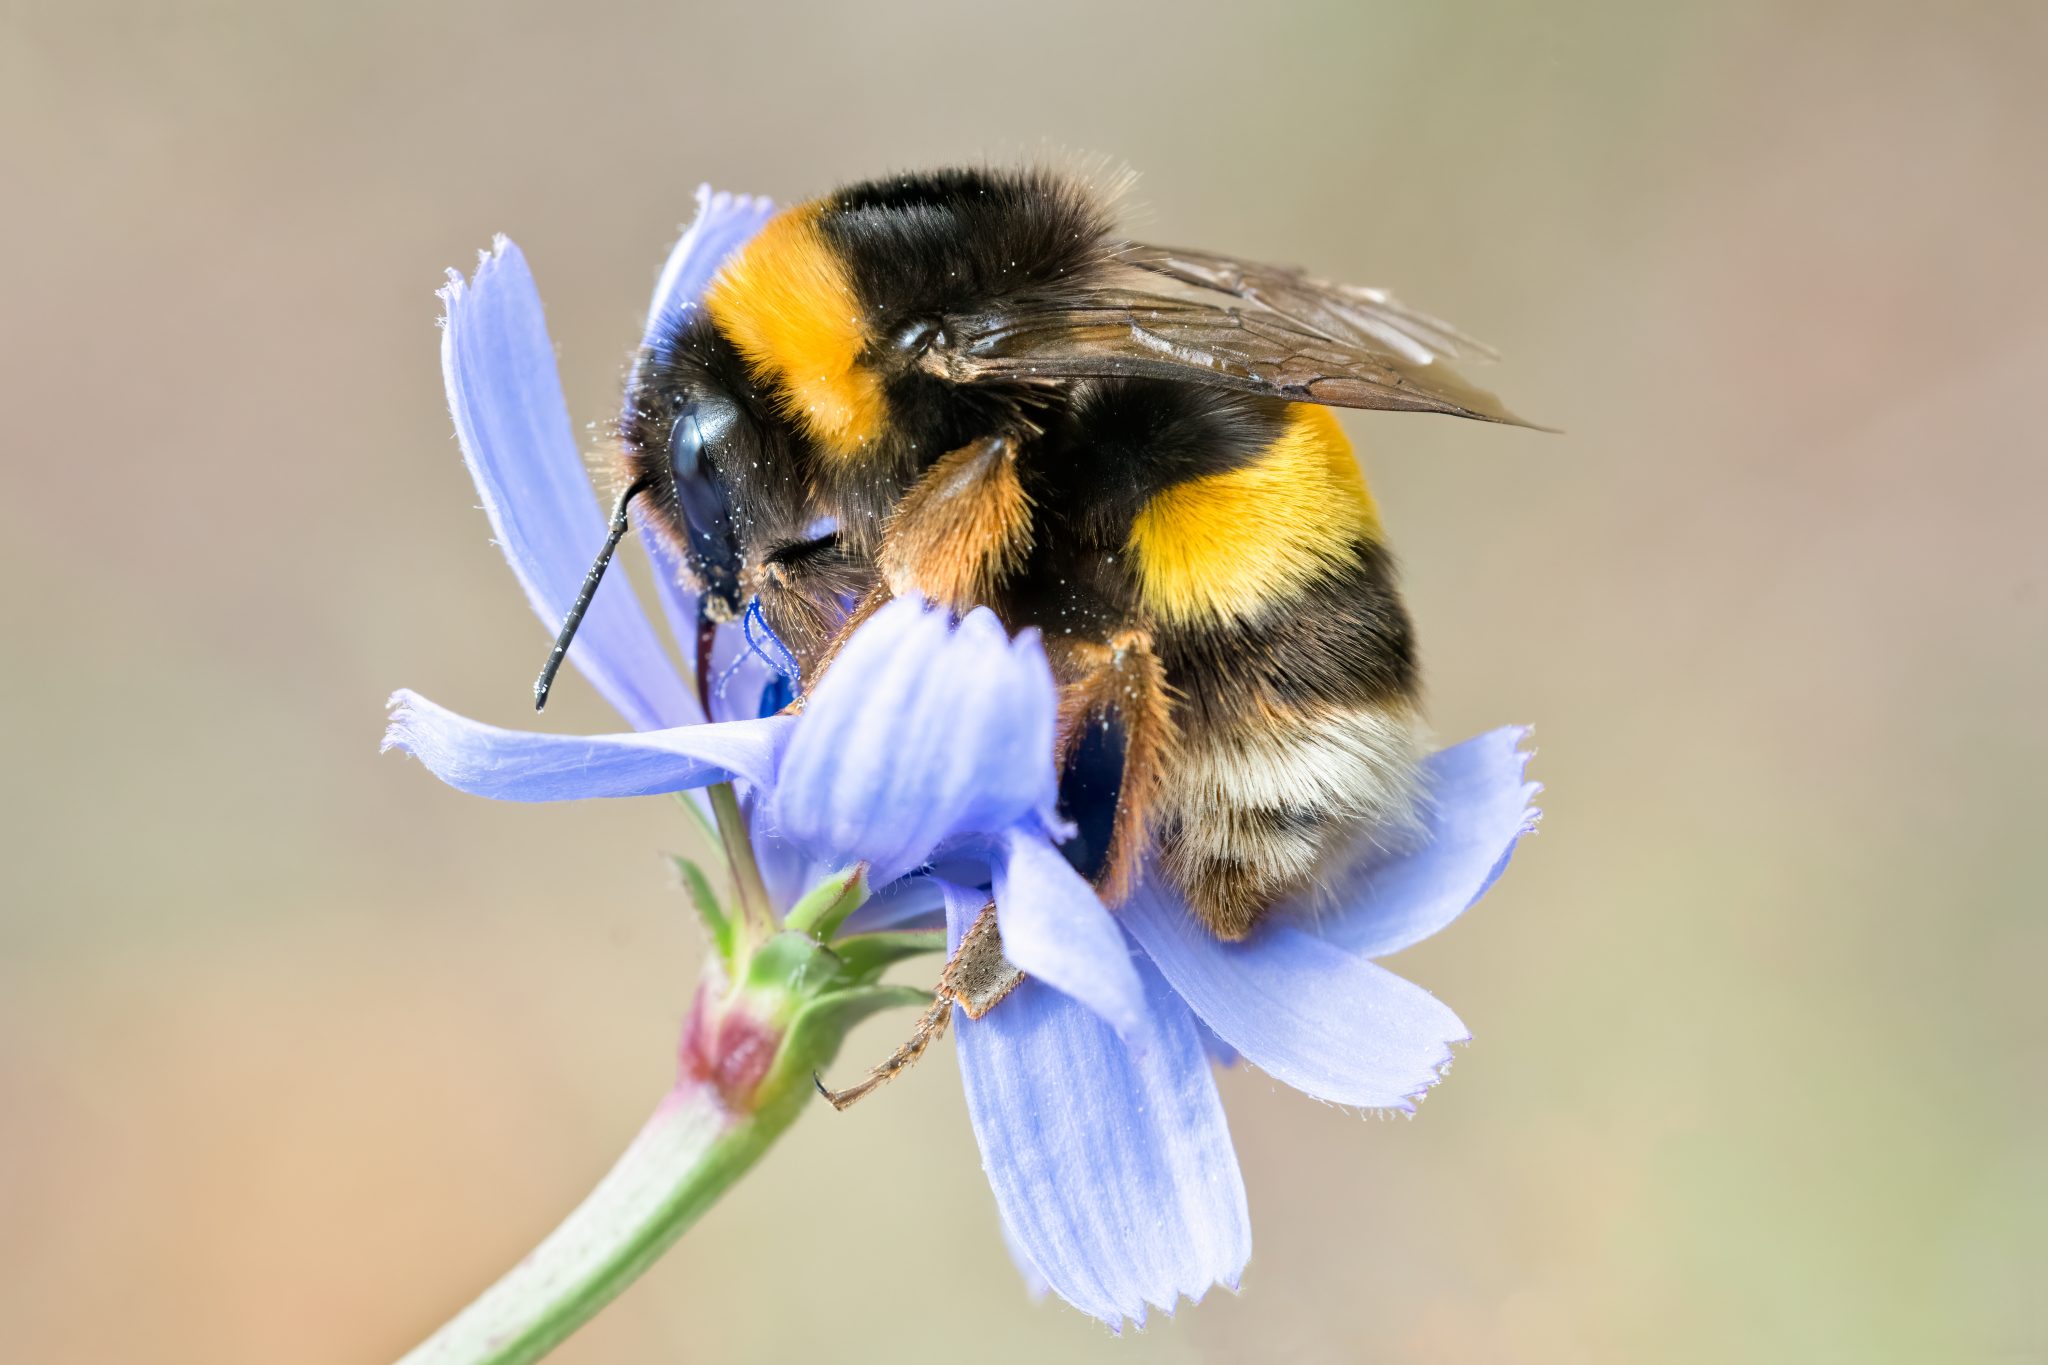 Bumblebee, pollinating and collecting nectar on a blue wild flower